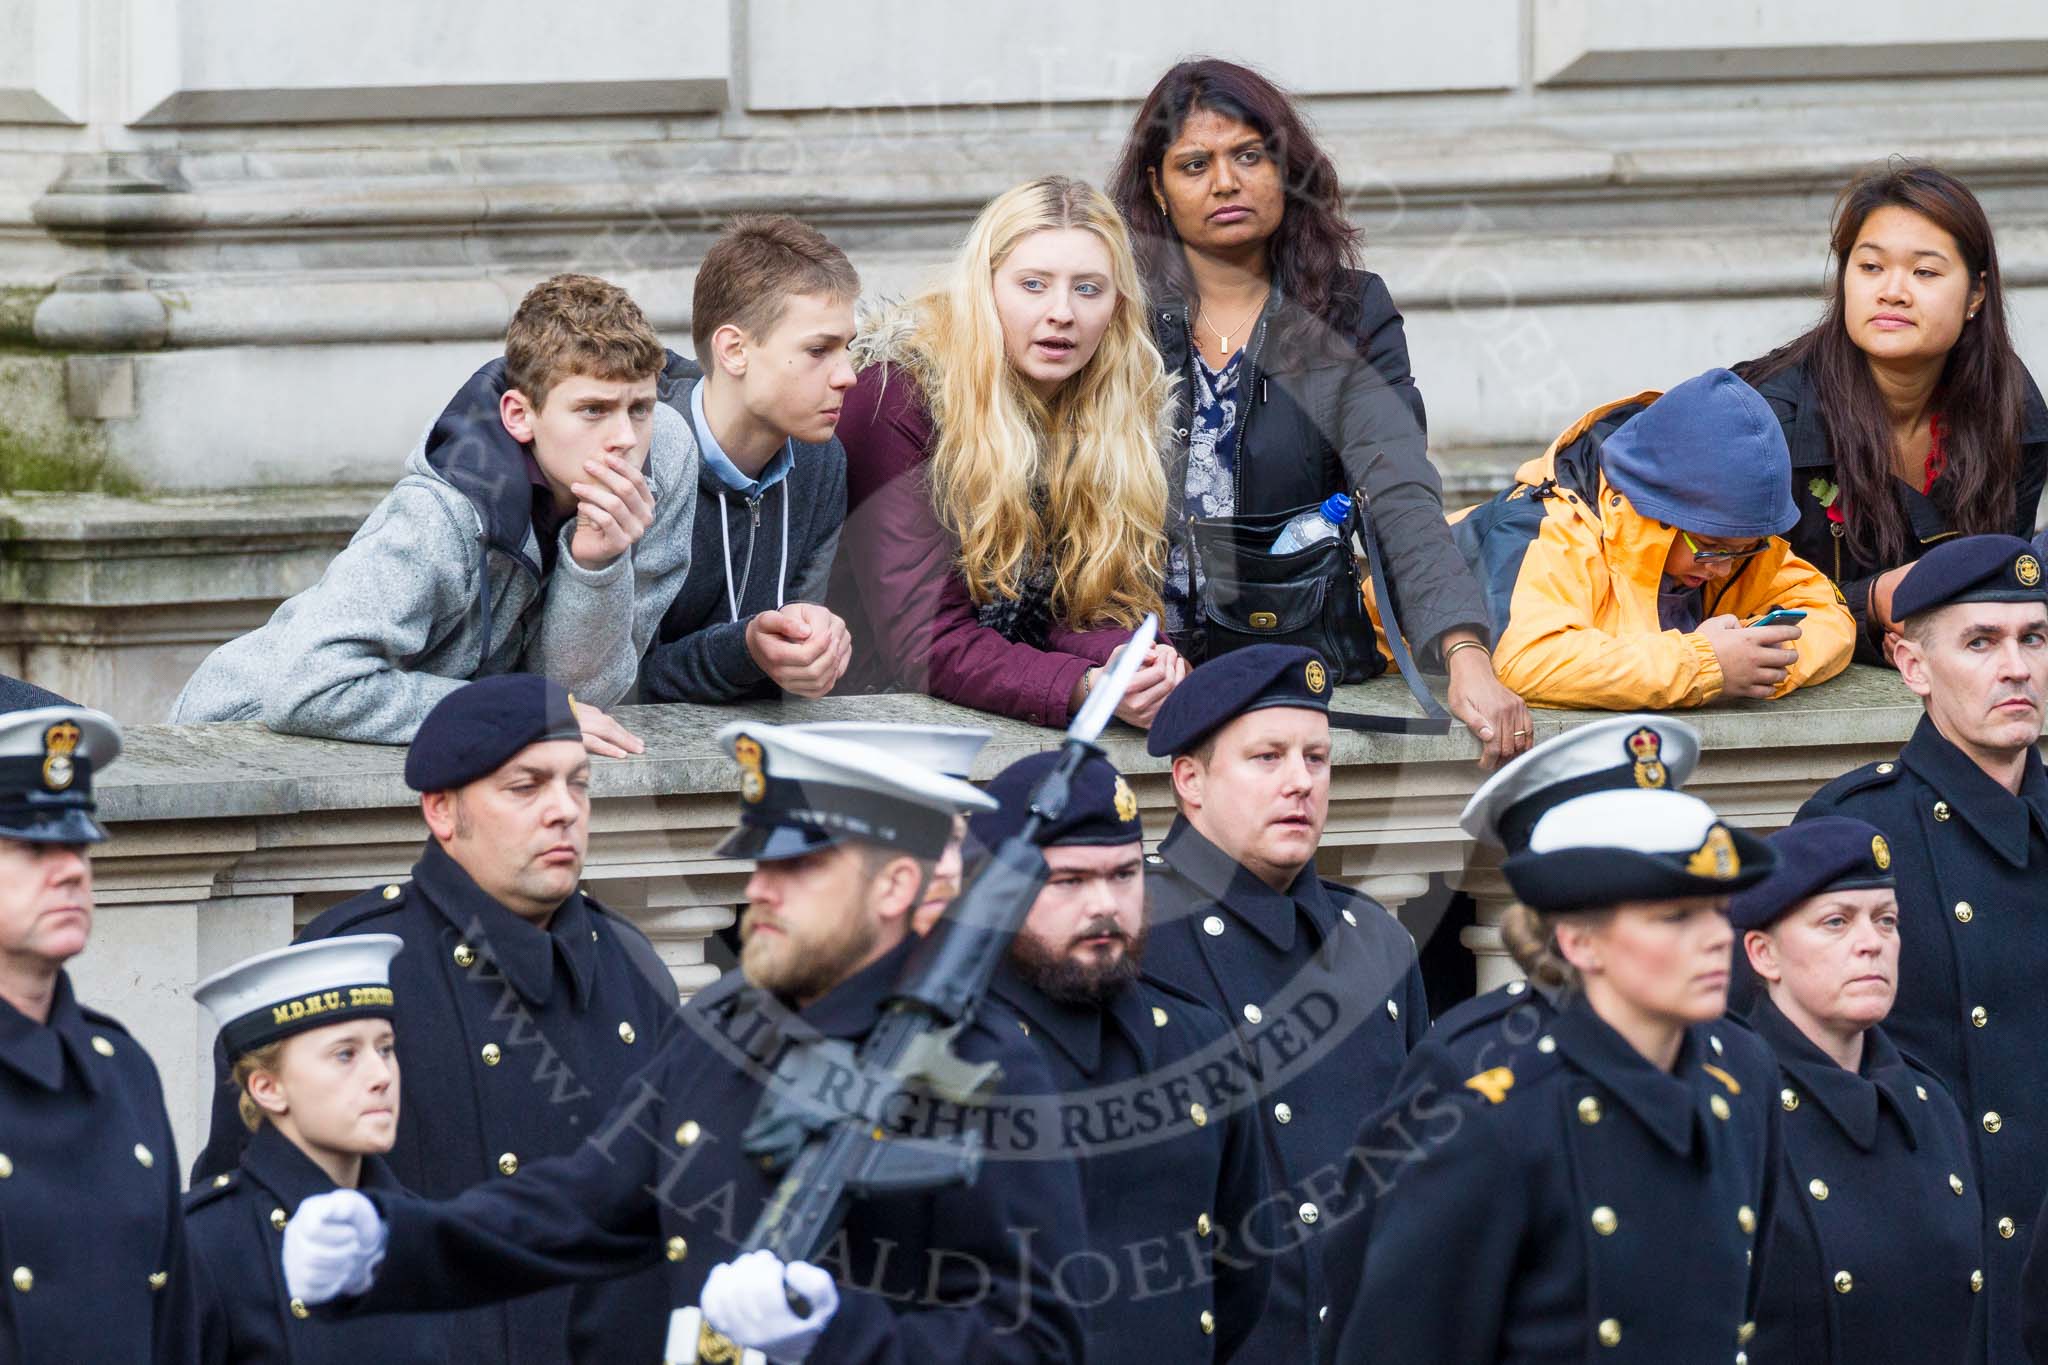 Remembrance Sunday at the Cenotaph 2015: Spectators on the Foreign Office side of Whitehall, behind the Royal Navy detachment. Image #42, 08 November 2015 10:20 Whitehall, London, UK